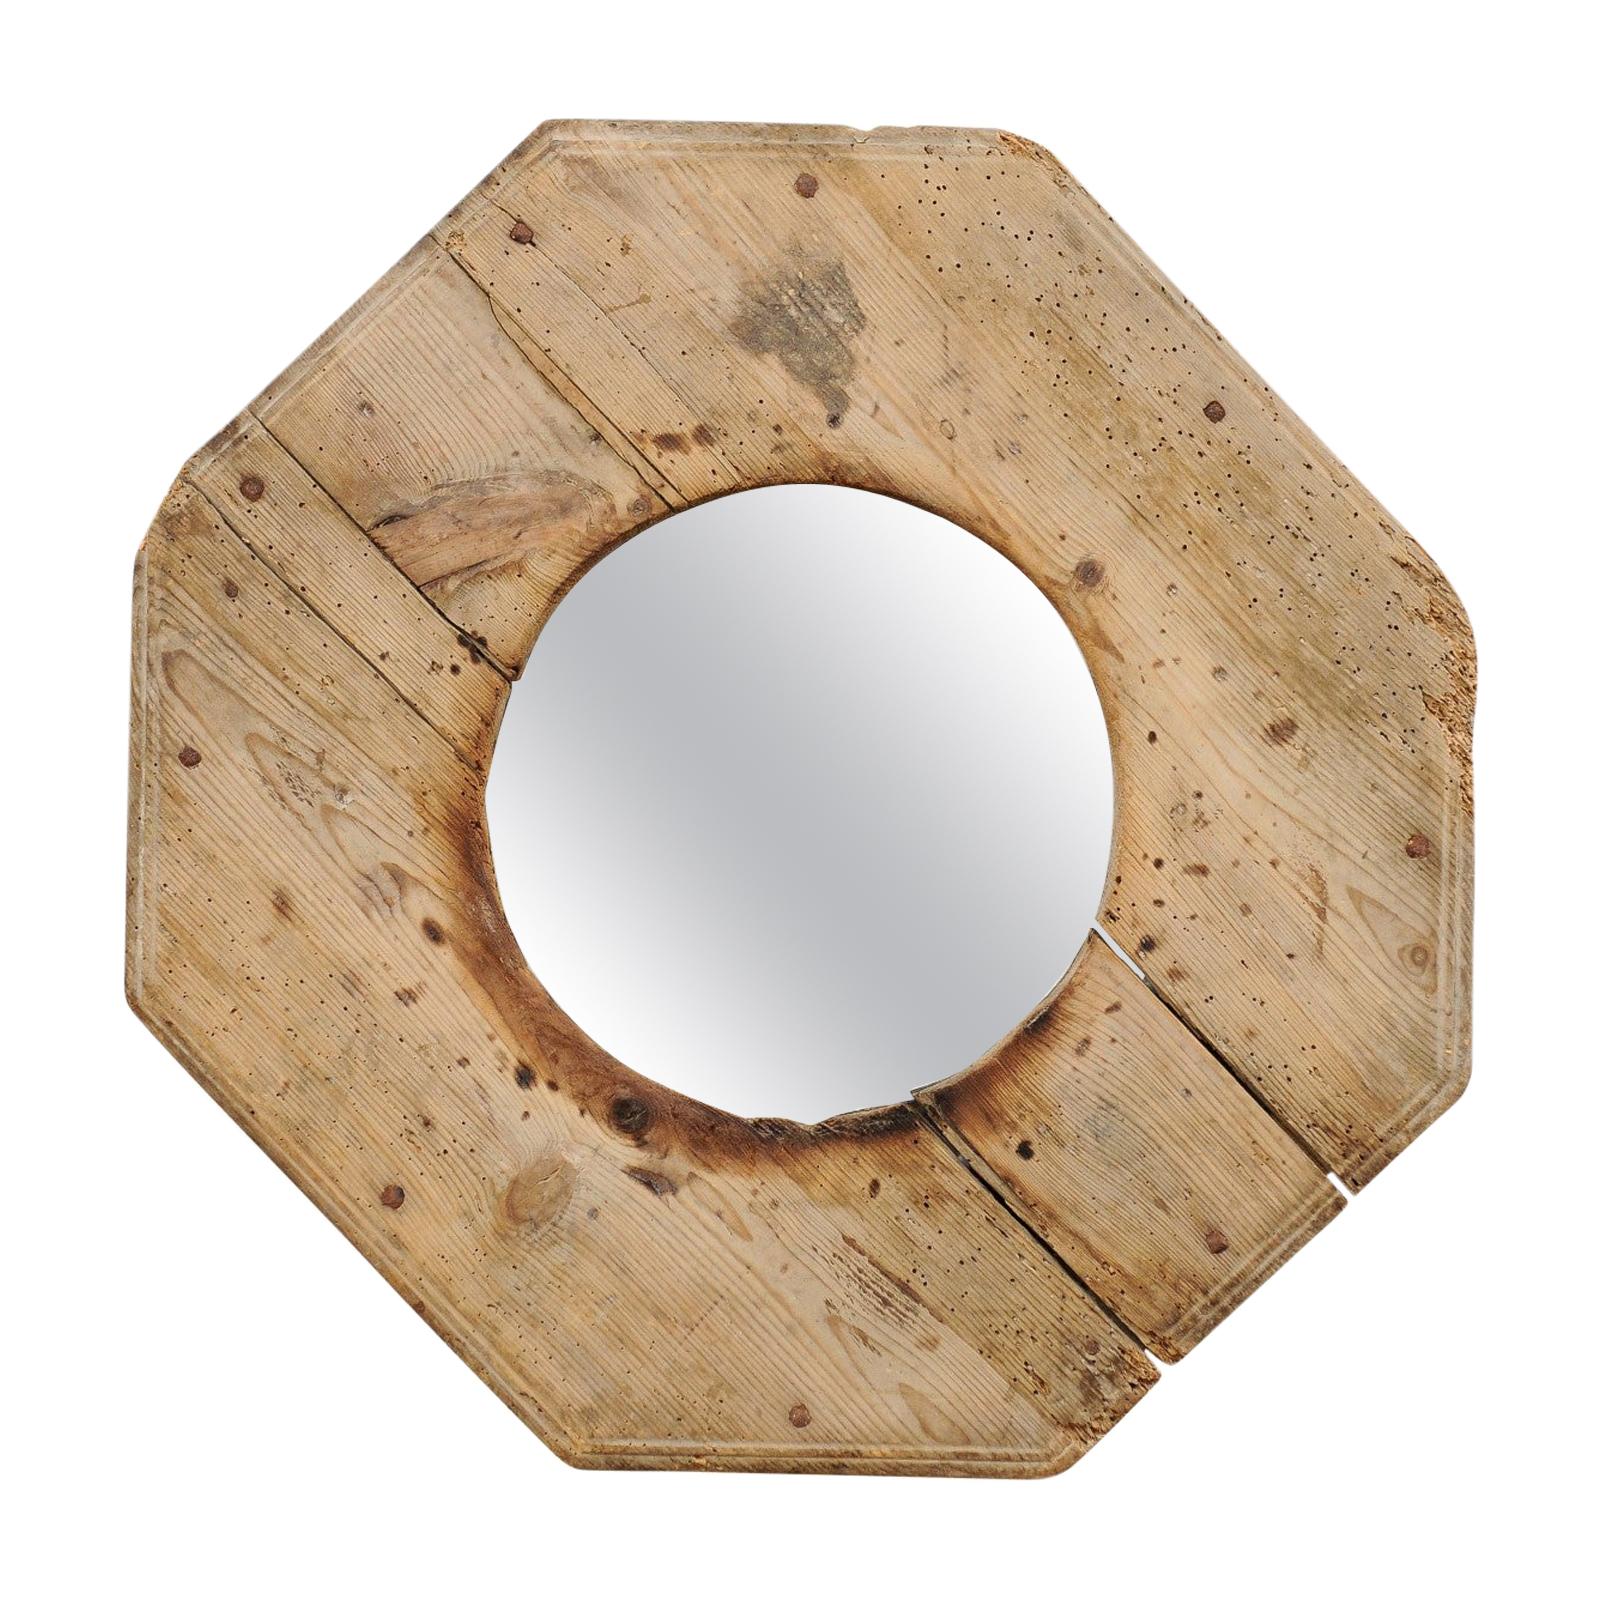 Unique Octagonal-Shaped Mirror with Great Side Profile and Projection from Wall